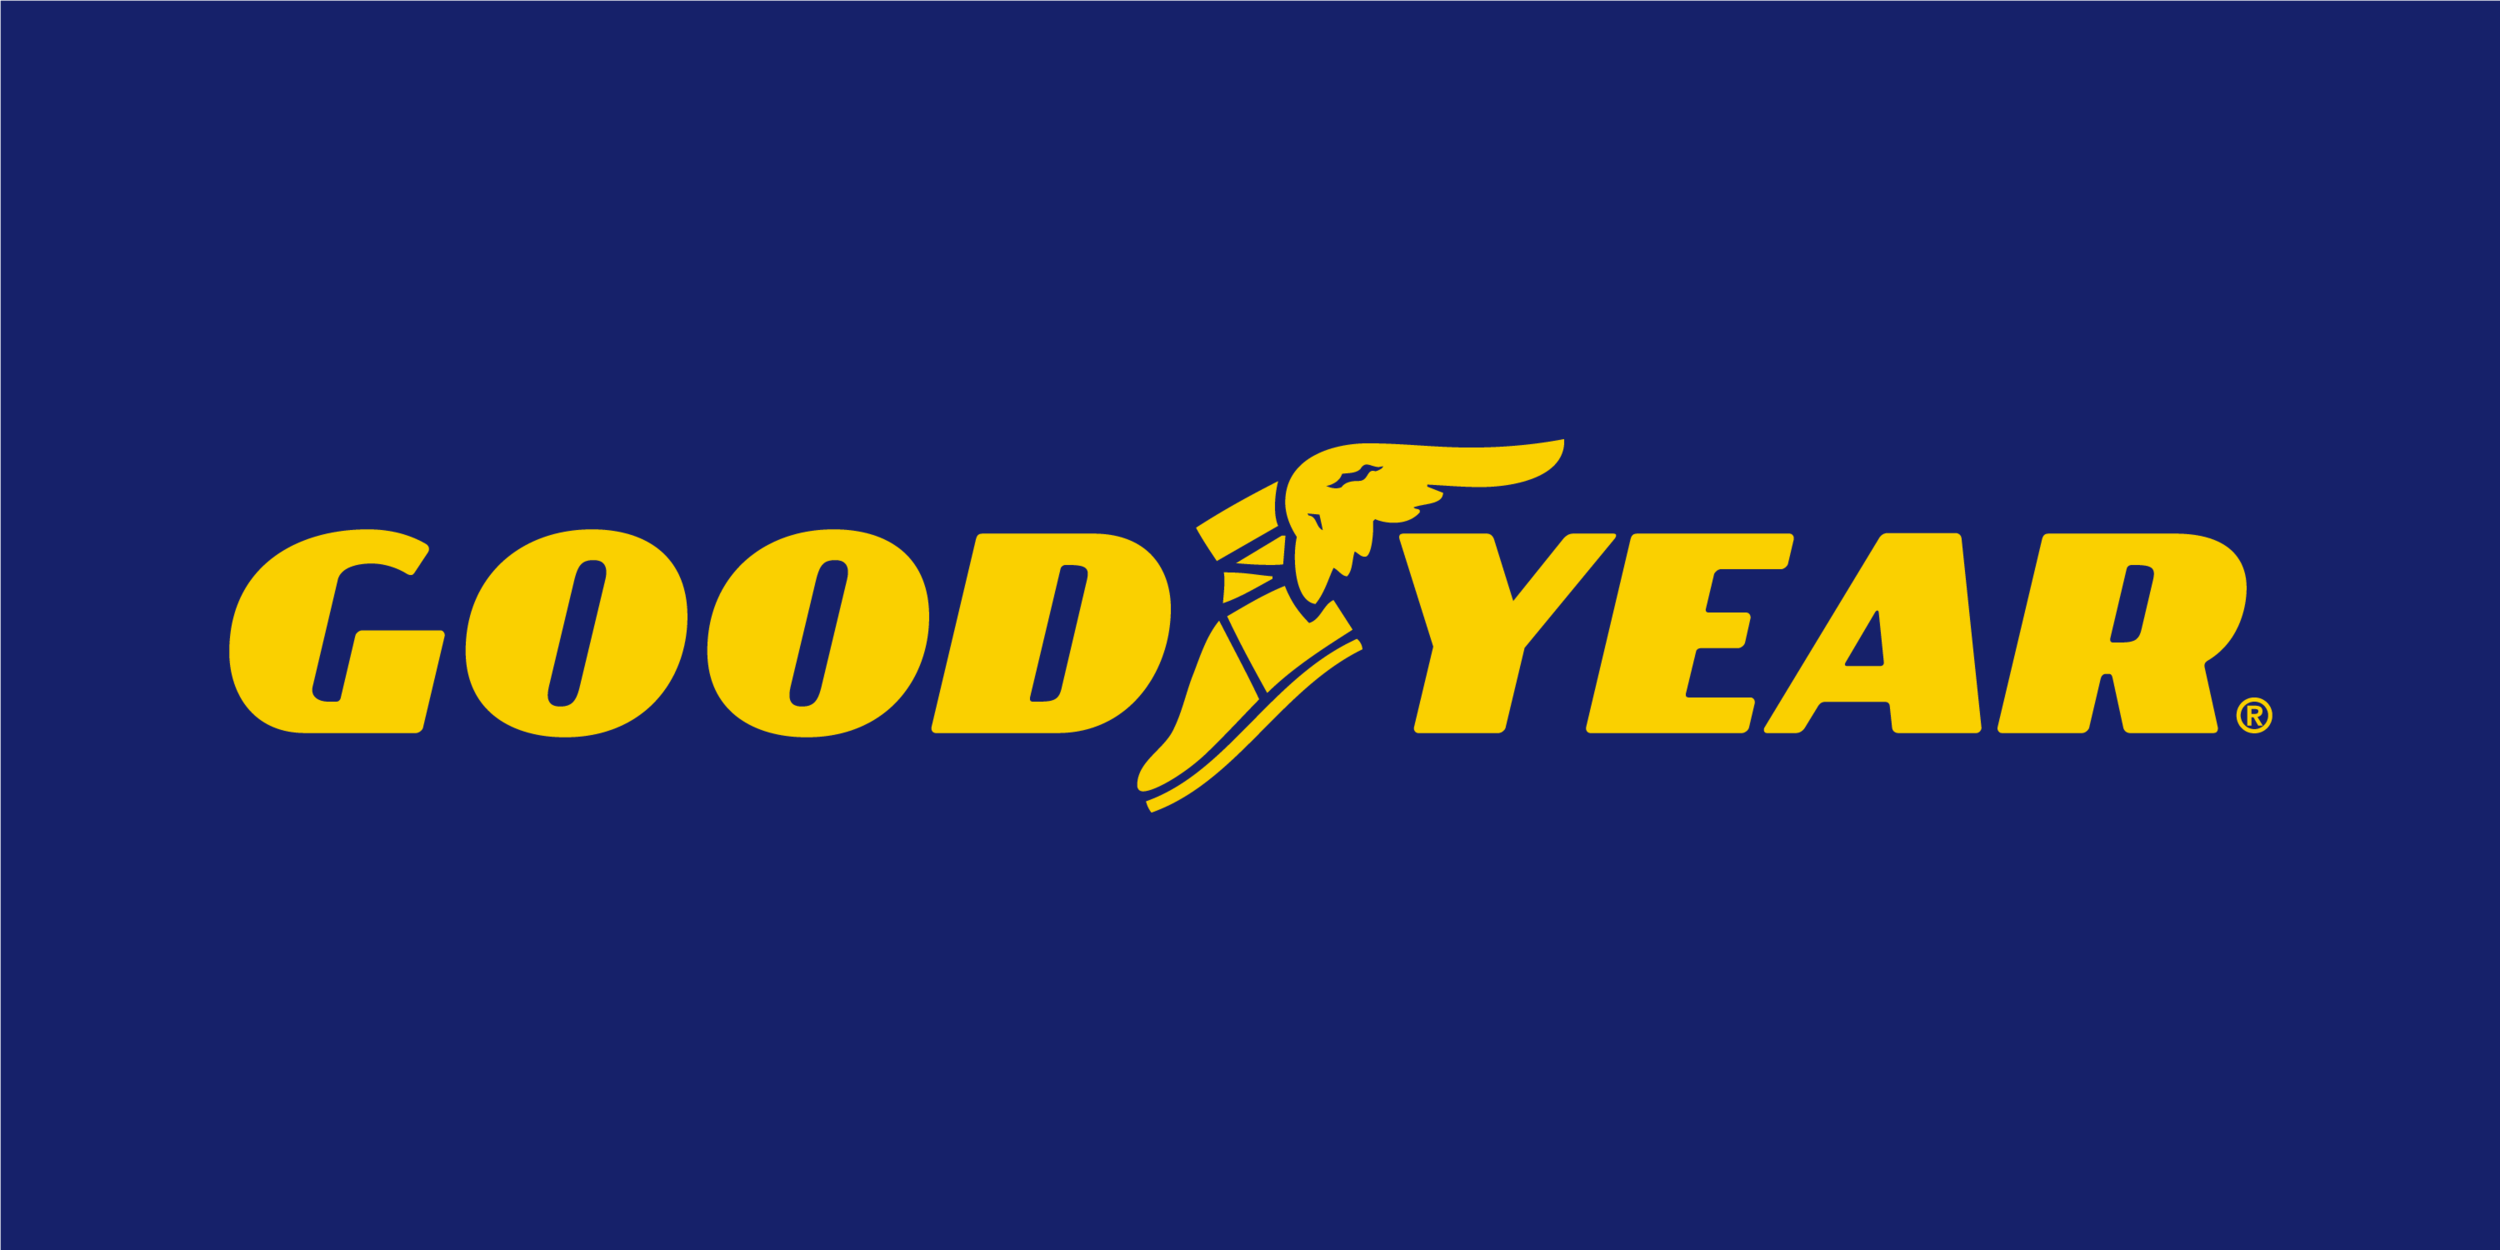 goodyear_logo_background.png